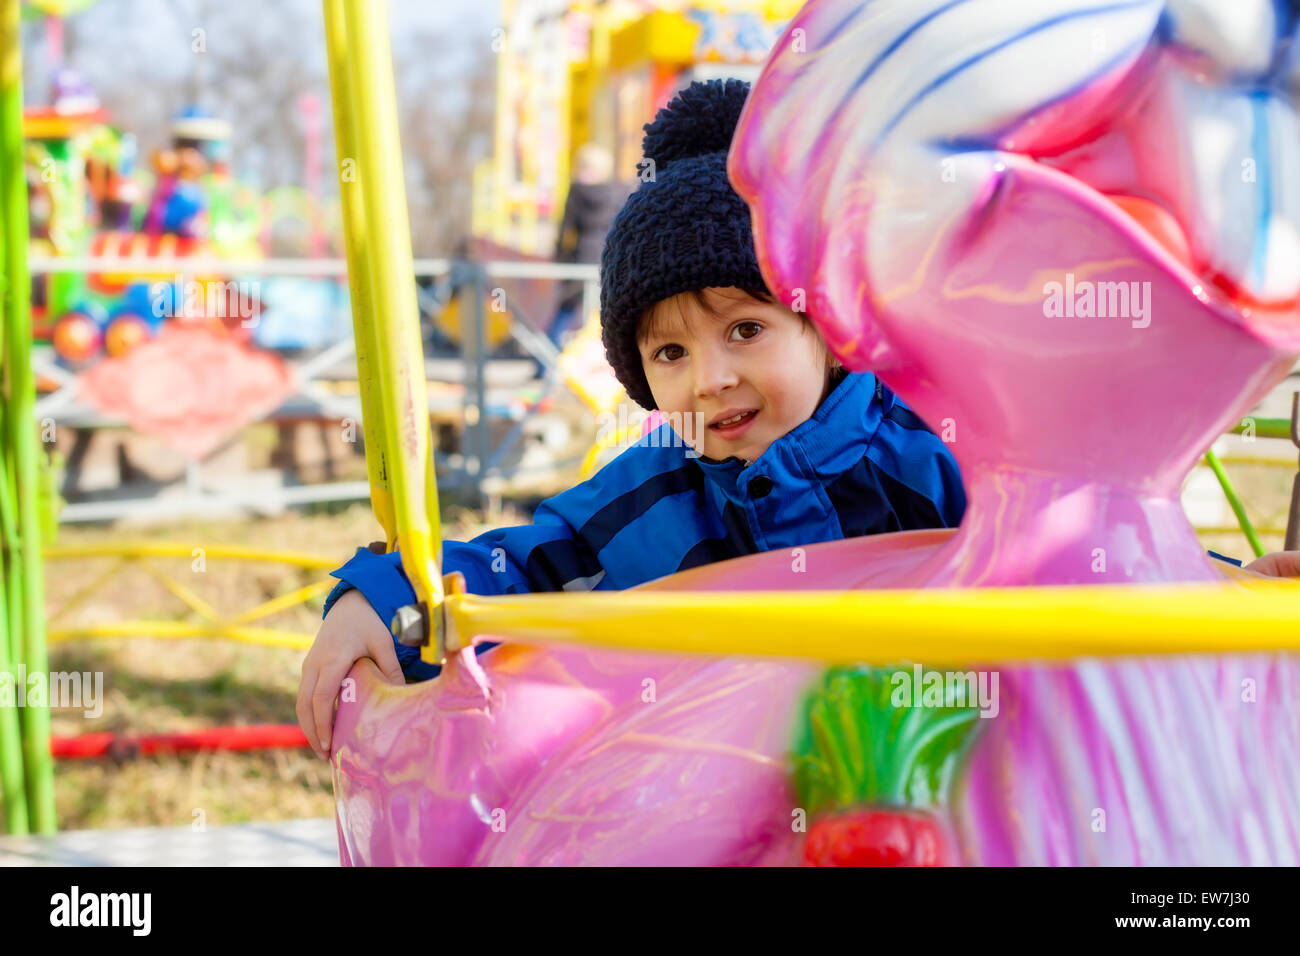 Adorable little boy, swinging on a pink rabbit in amusement park Stock Photo